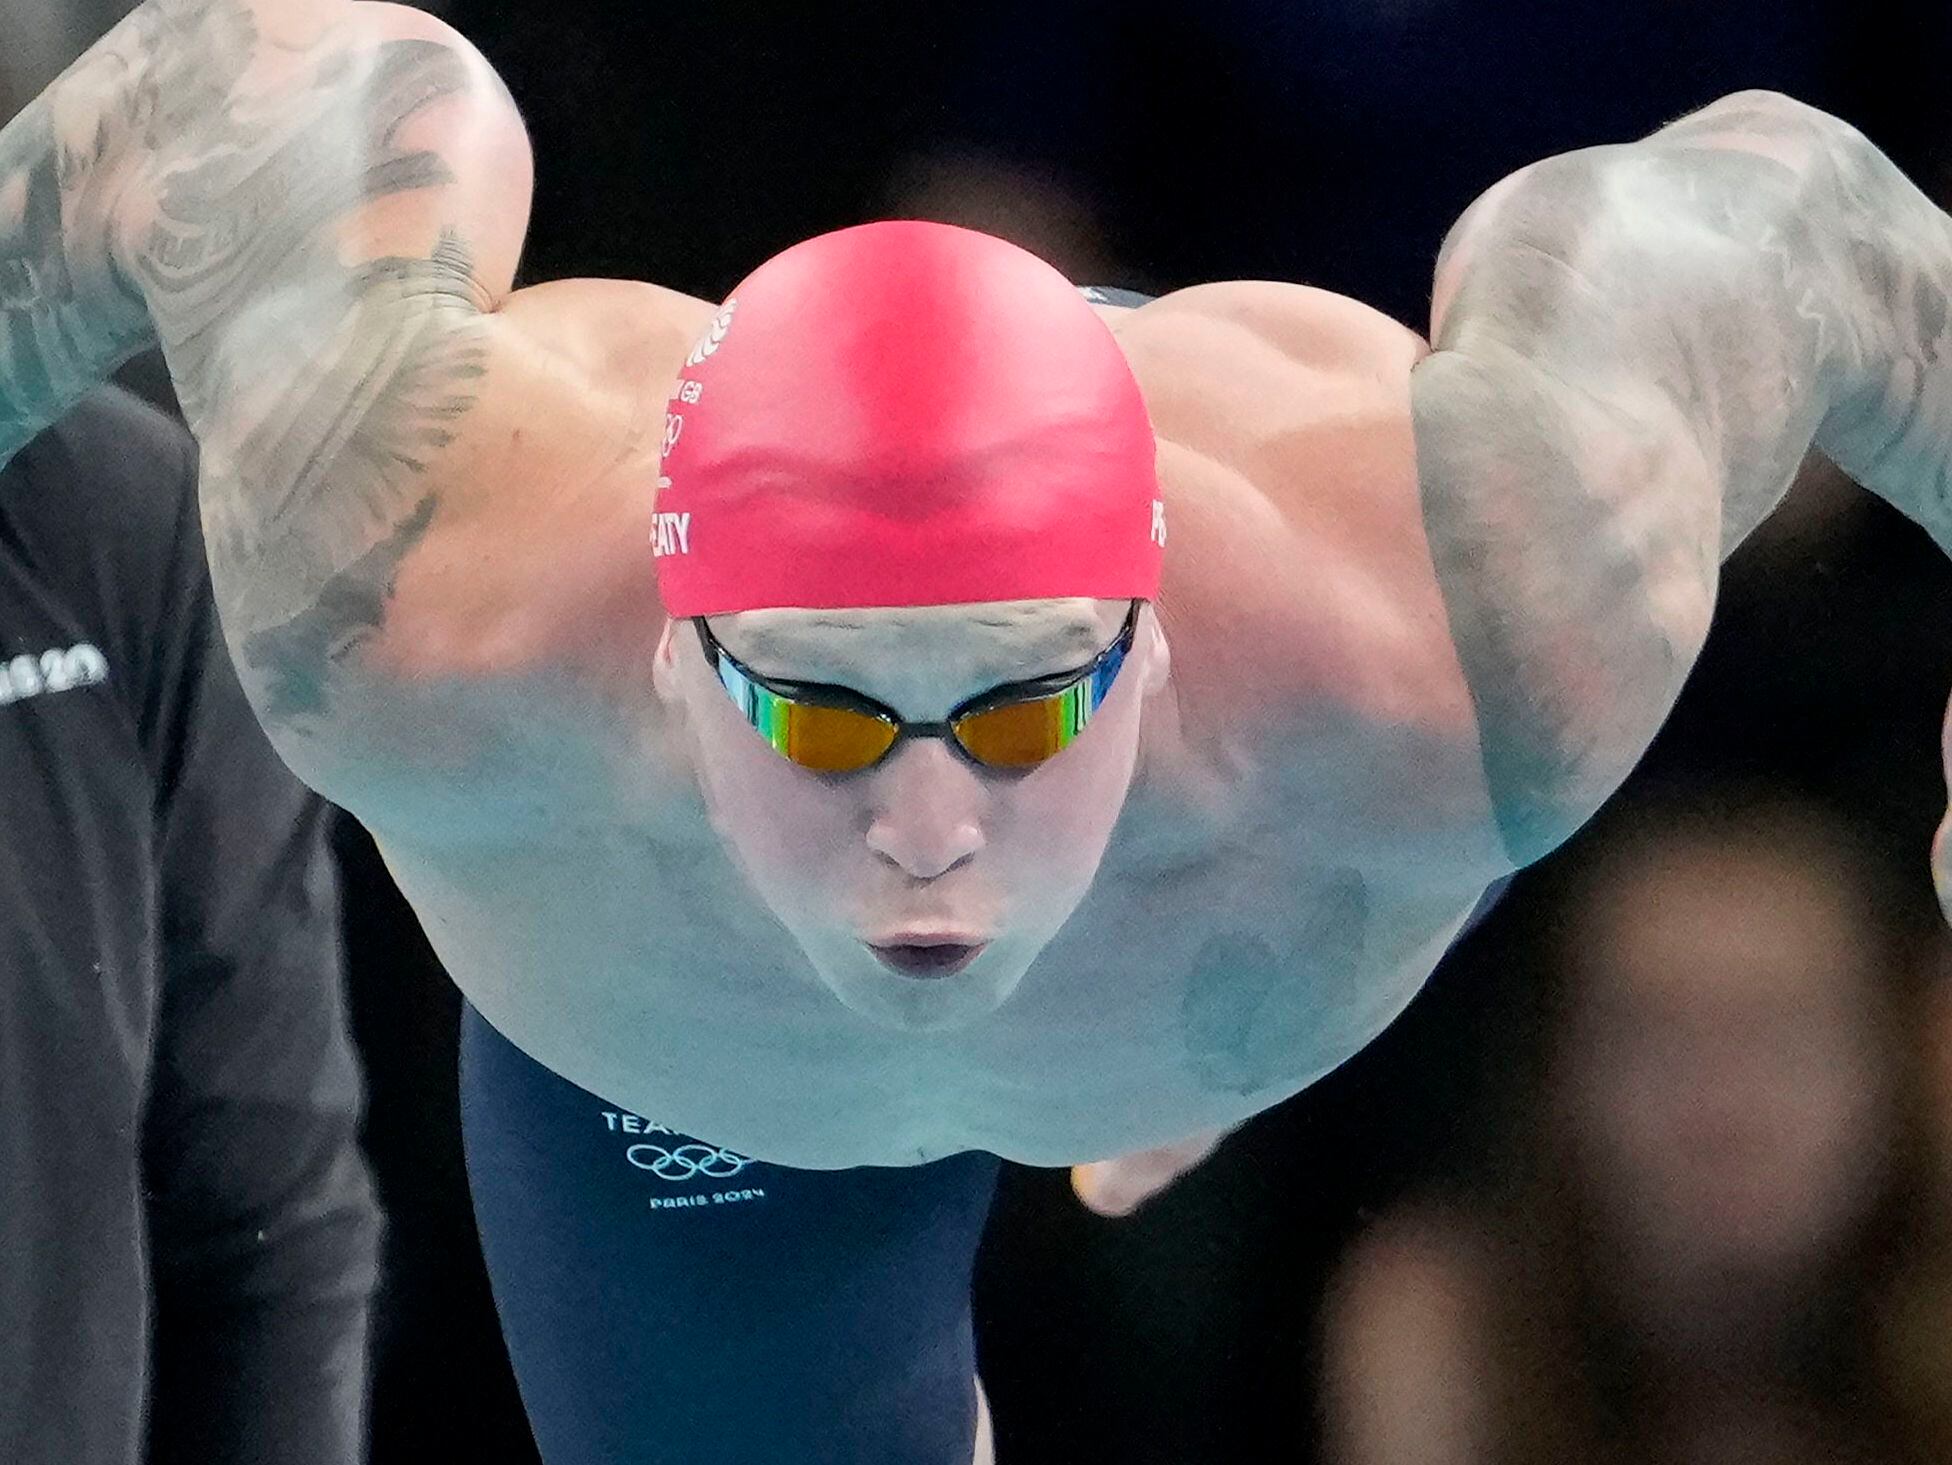 Adam Peaty loses but has found something more valuable than Olympic gold